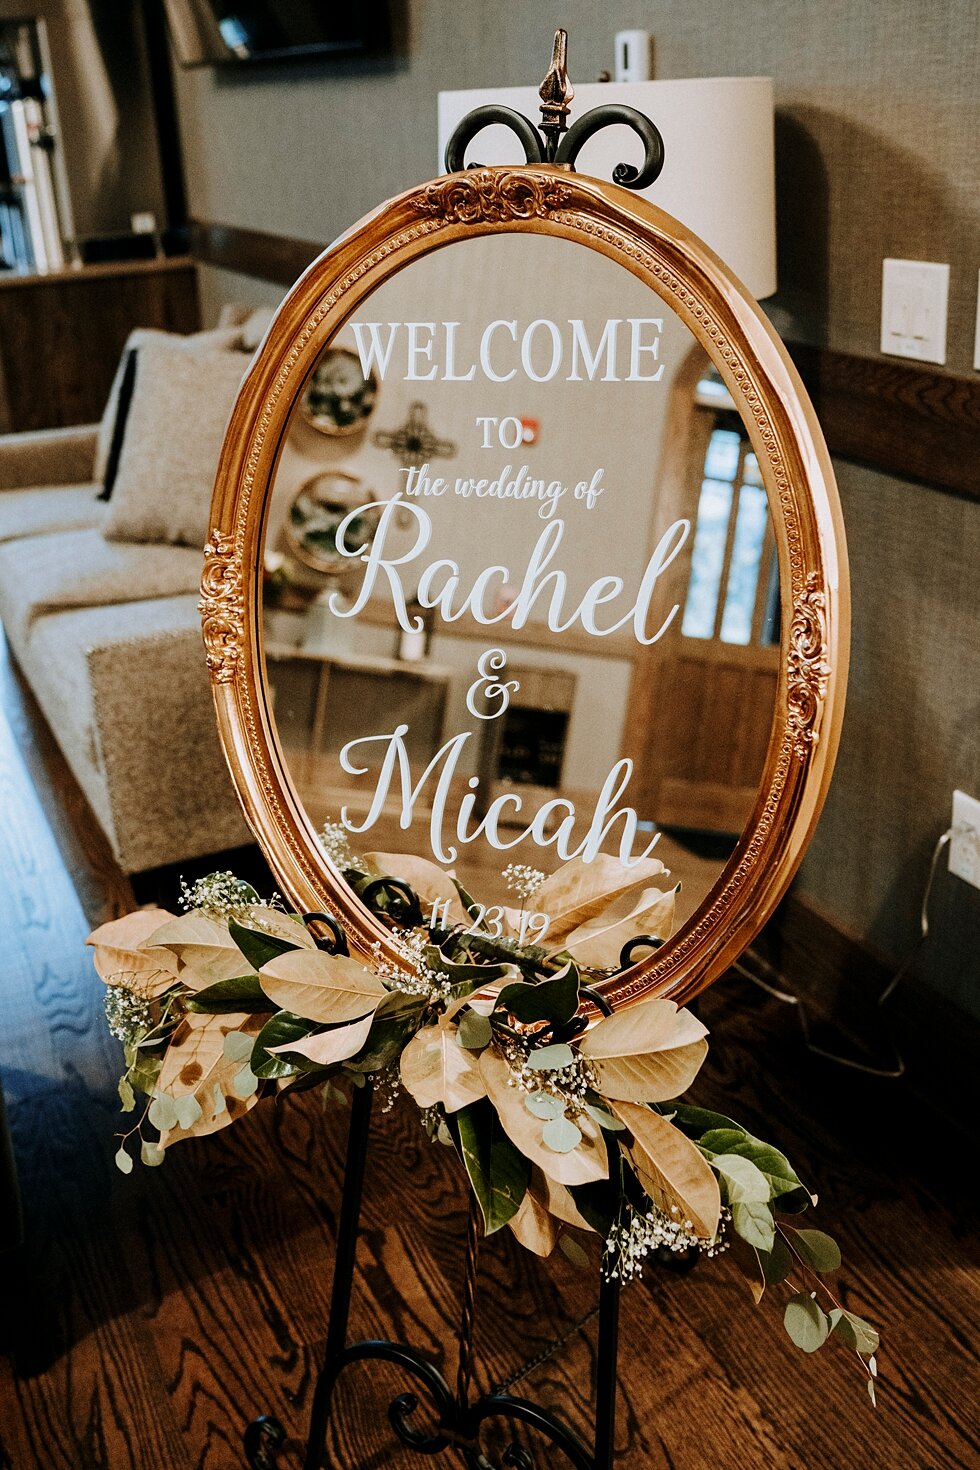  Personalized mirror for the bride and groom. gold with floral accents #thatsdarling #weddingday #weddinginspiration #weddingphoto #love #justmarried #midwestphotographer #kywedding #louisville #kentuckywedding #auburnkyweddingphotographer #weddingbl